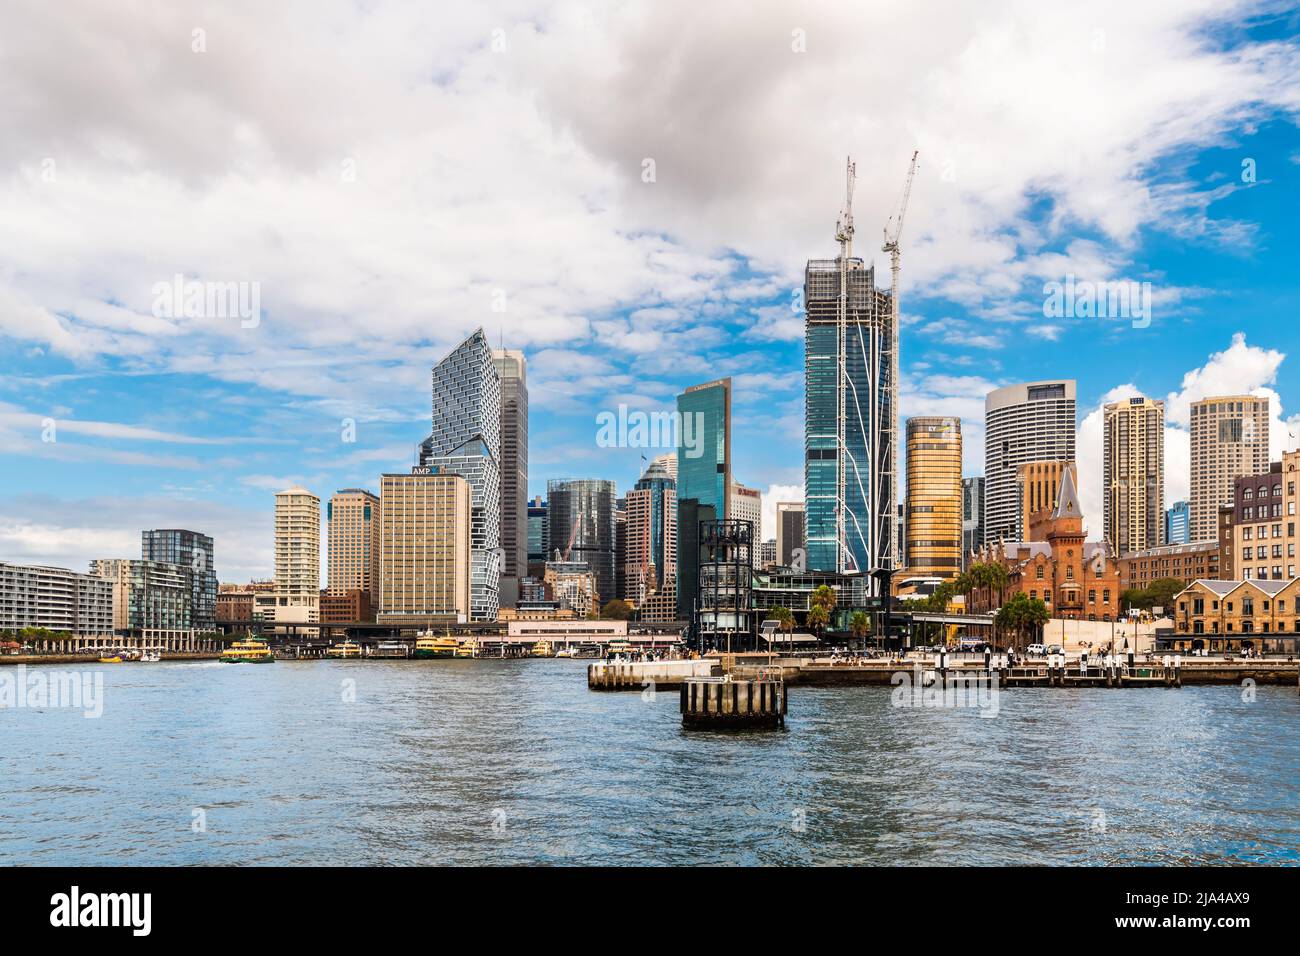 Sydney City, Australia - April 16, 2022: Sydney central business district and Circular Quay viewed through Campbells Cove from Hickson Road Reserve on Stock Photo